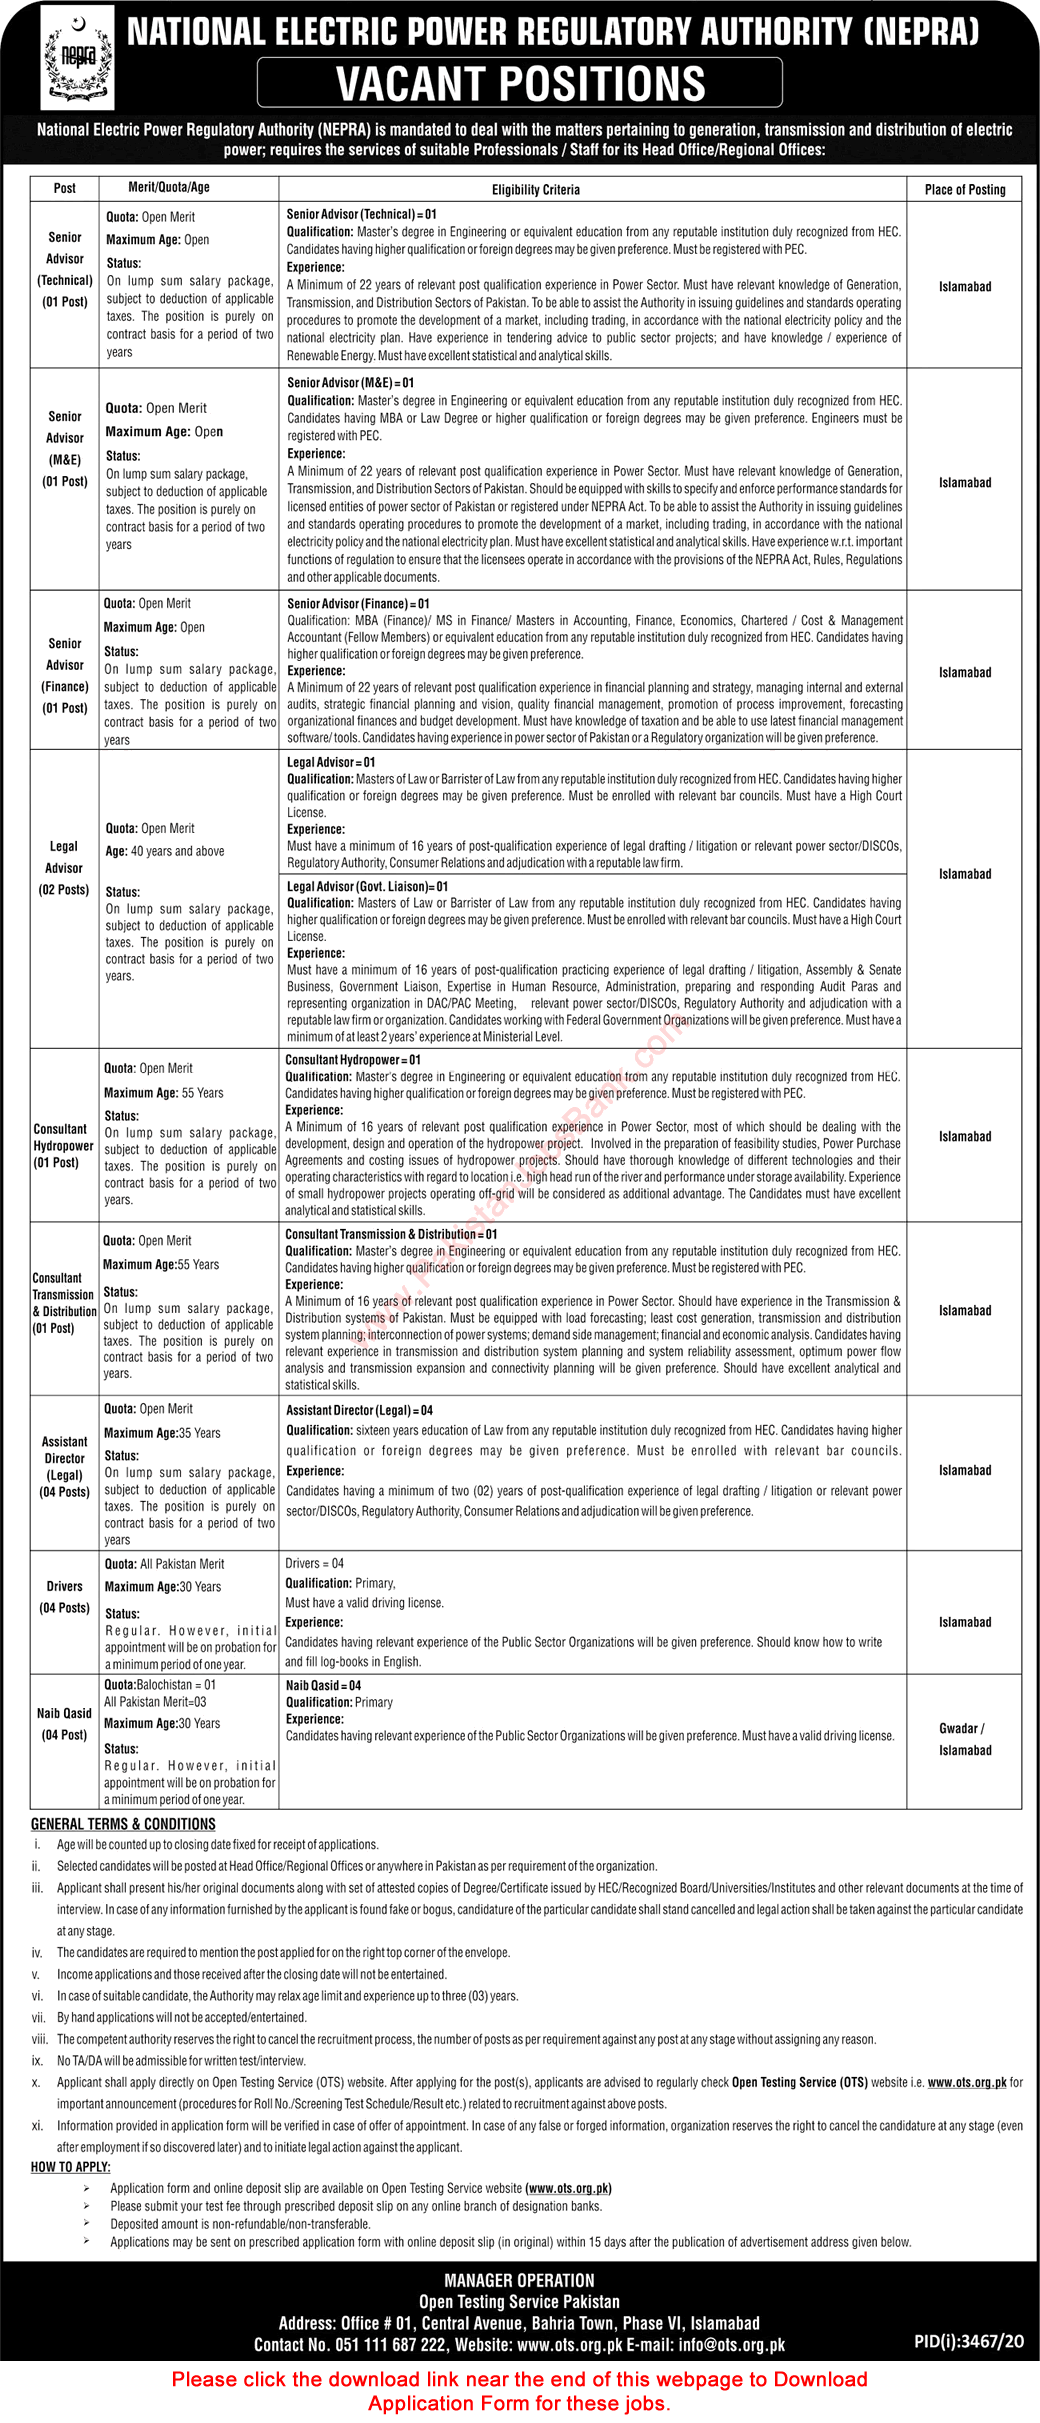 National Electric Power Regulatory Authority Jobs 2021 January NEPRA OTS Application Form Assistant Directors & Others Latest